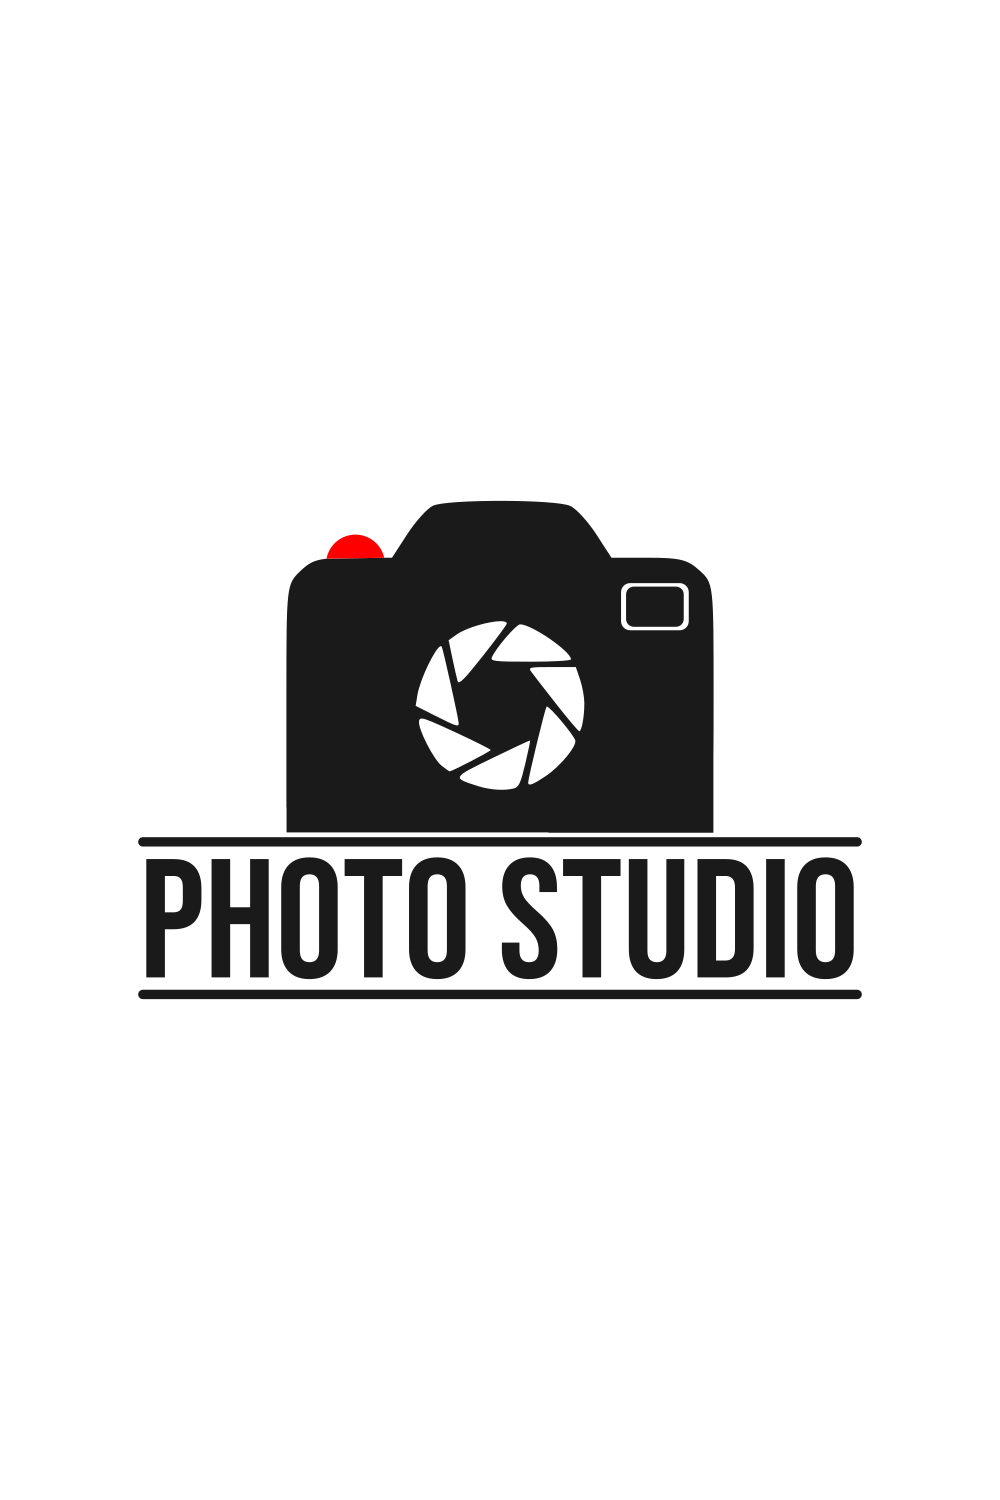 Photography Attractive Logo Design Template pinterest image.